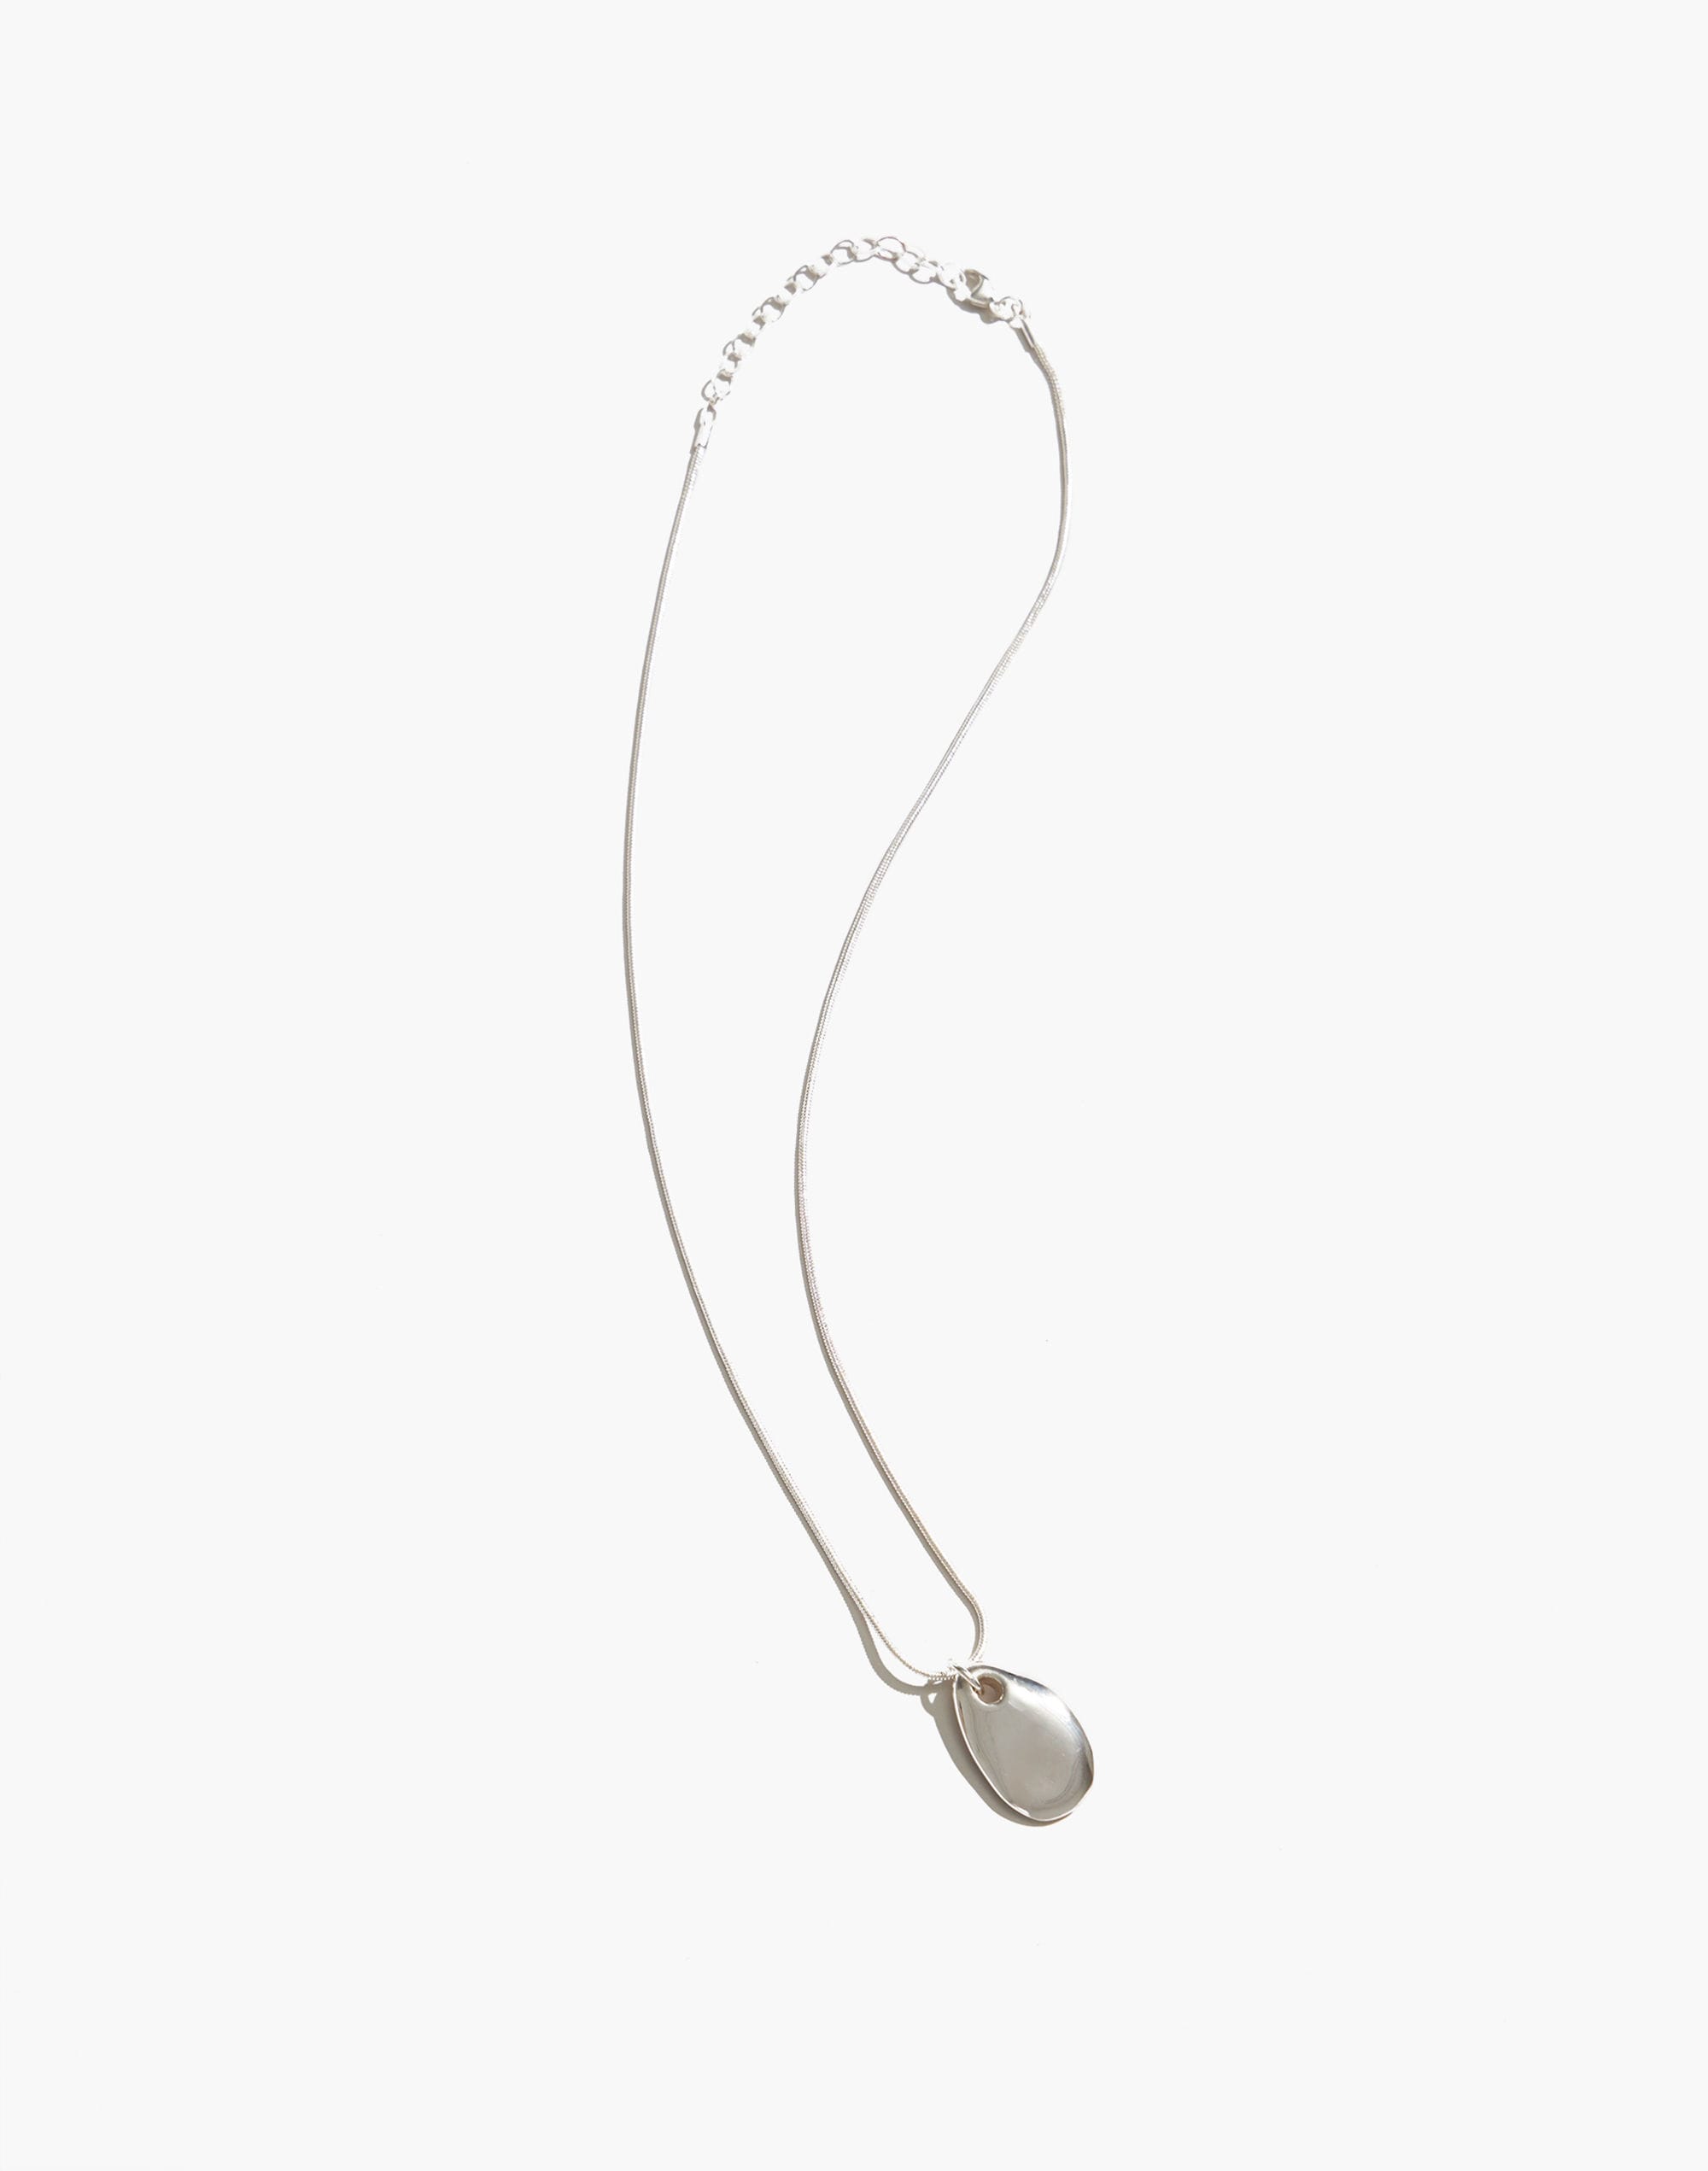 Maslo Jewelry Small Pebble Pendant Necklace Sterling Silver Chain